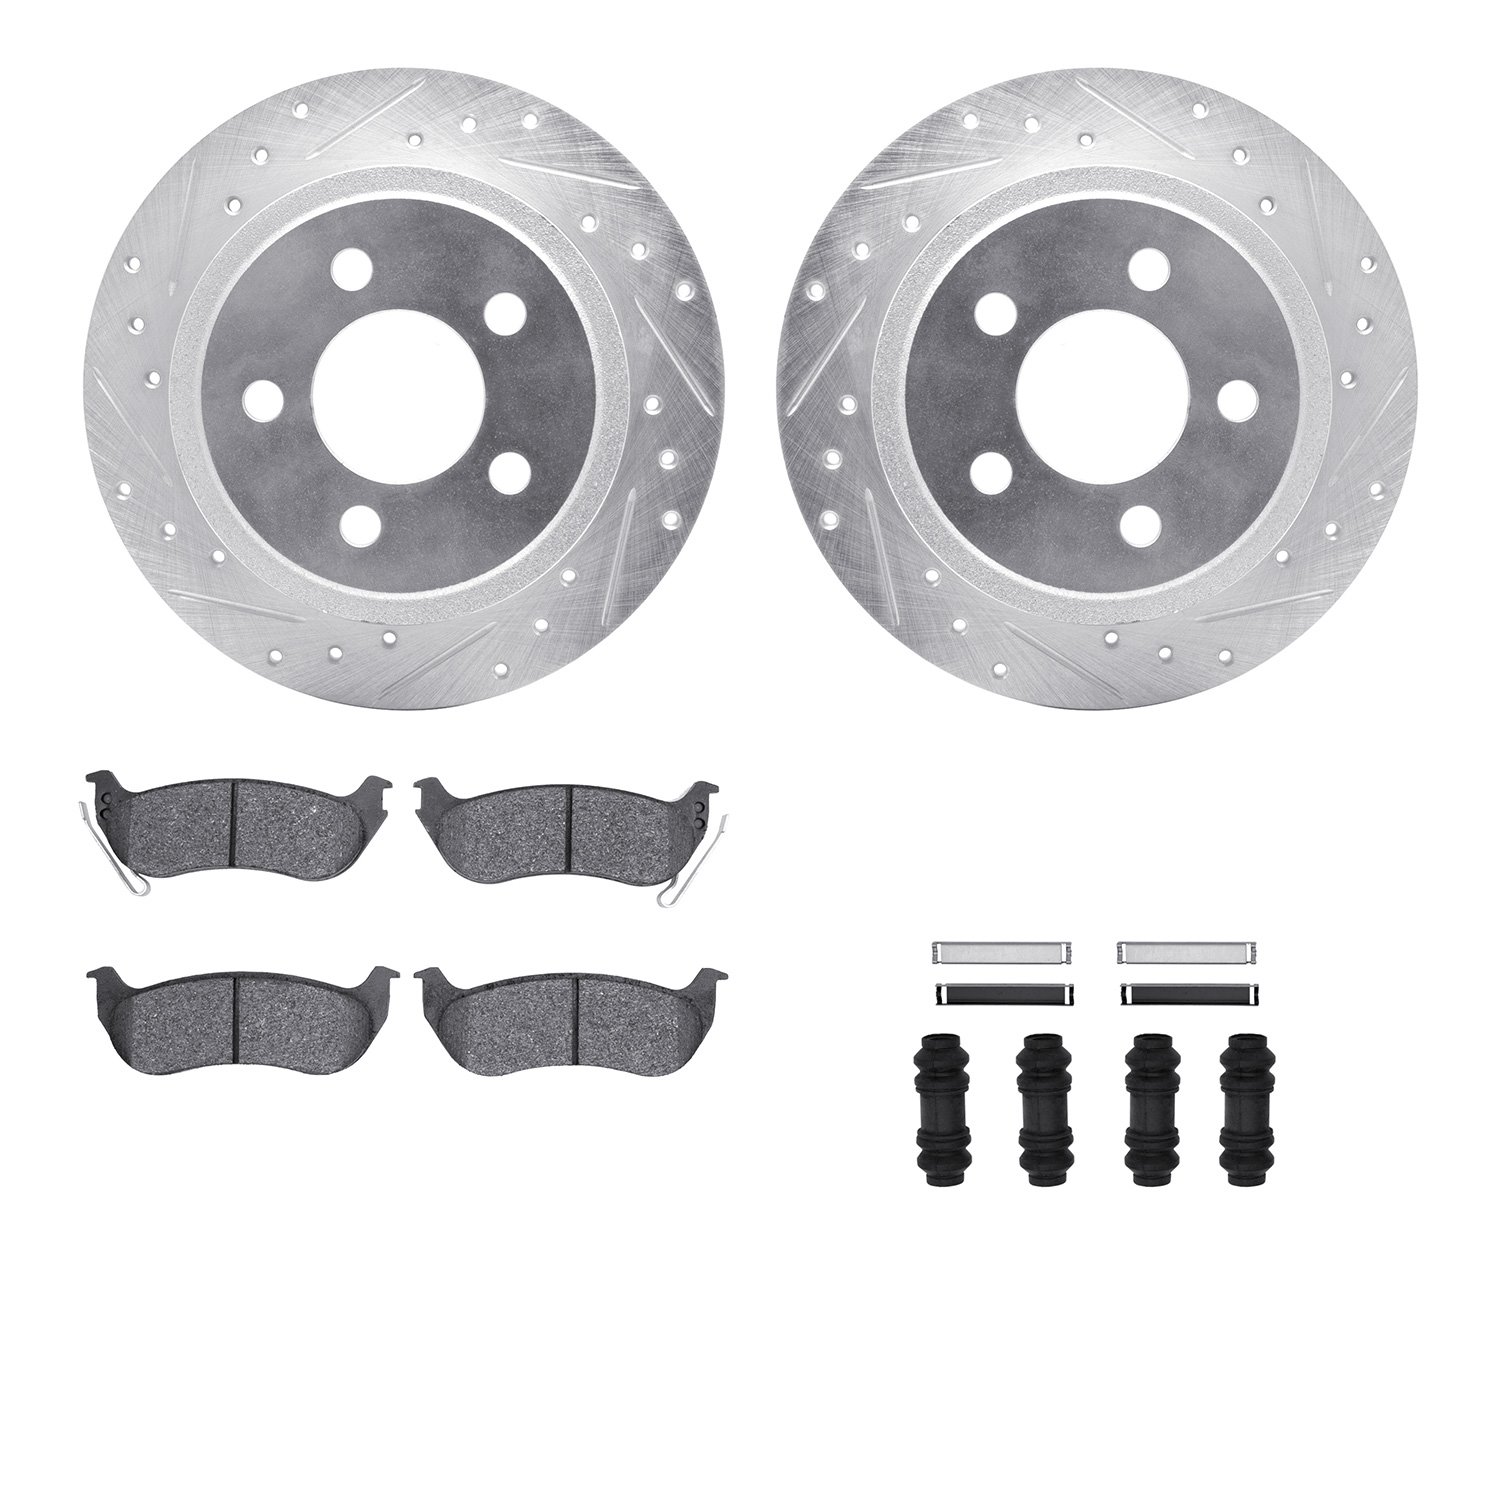 7412-42036 Drilled/Slotted Brake Rotors with Ultimate-Duty Brake Pads Kit & Hardware [Silver], 2003-2007 Mopar, Position: Rear